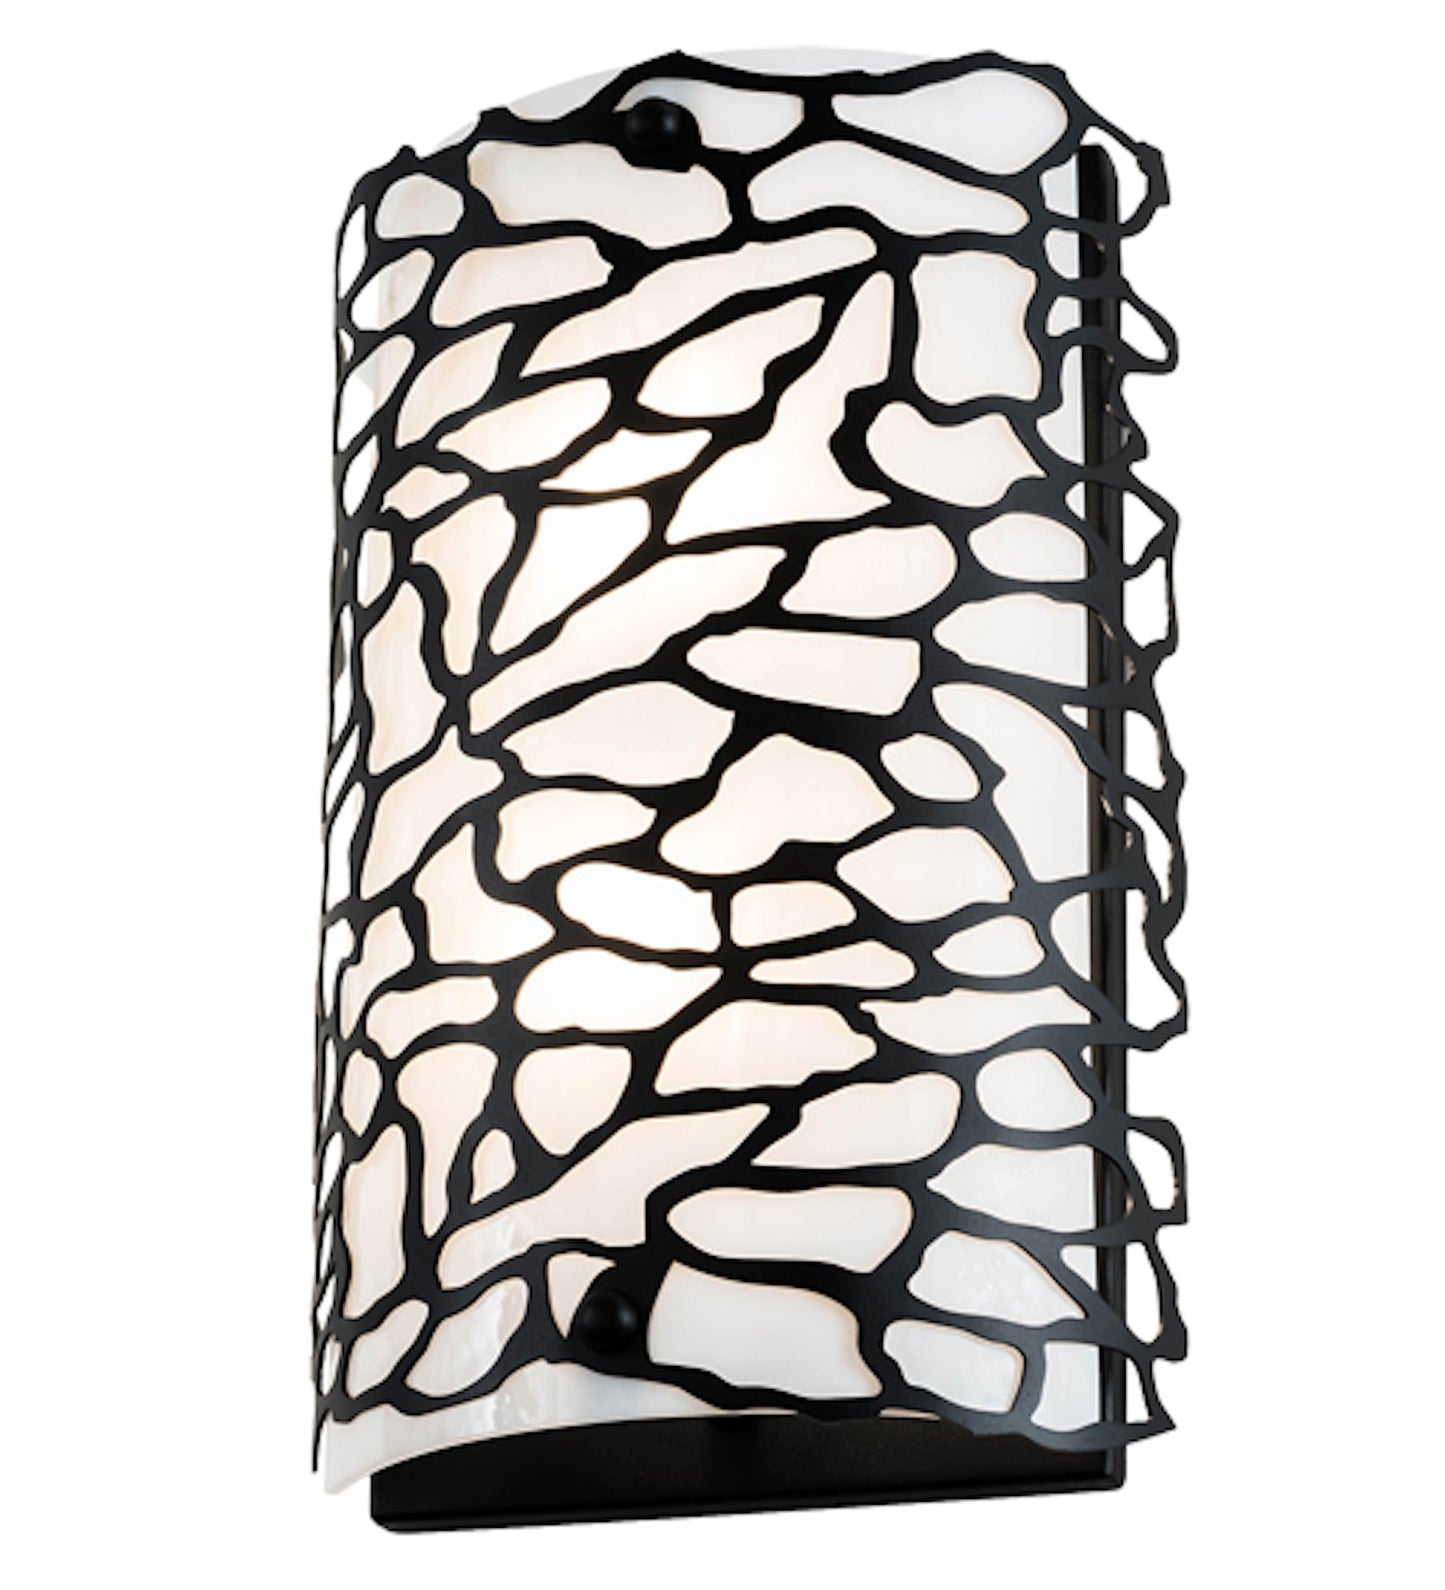 10" Parmecia Wall Sconce by 2nd Ave Lighting